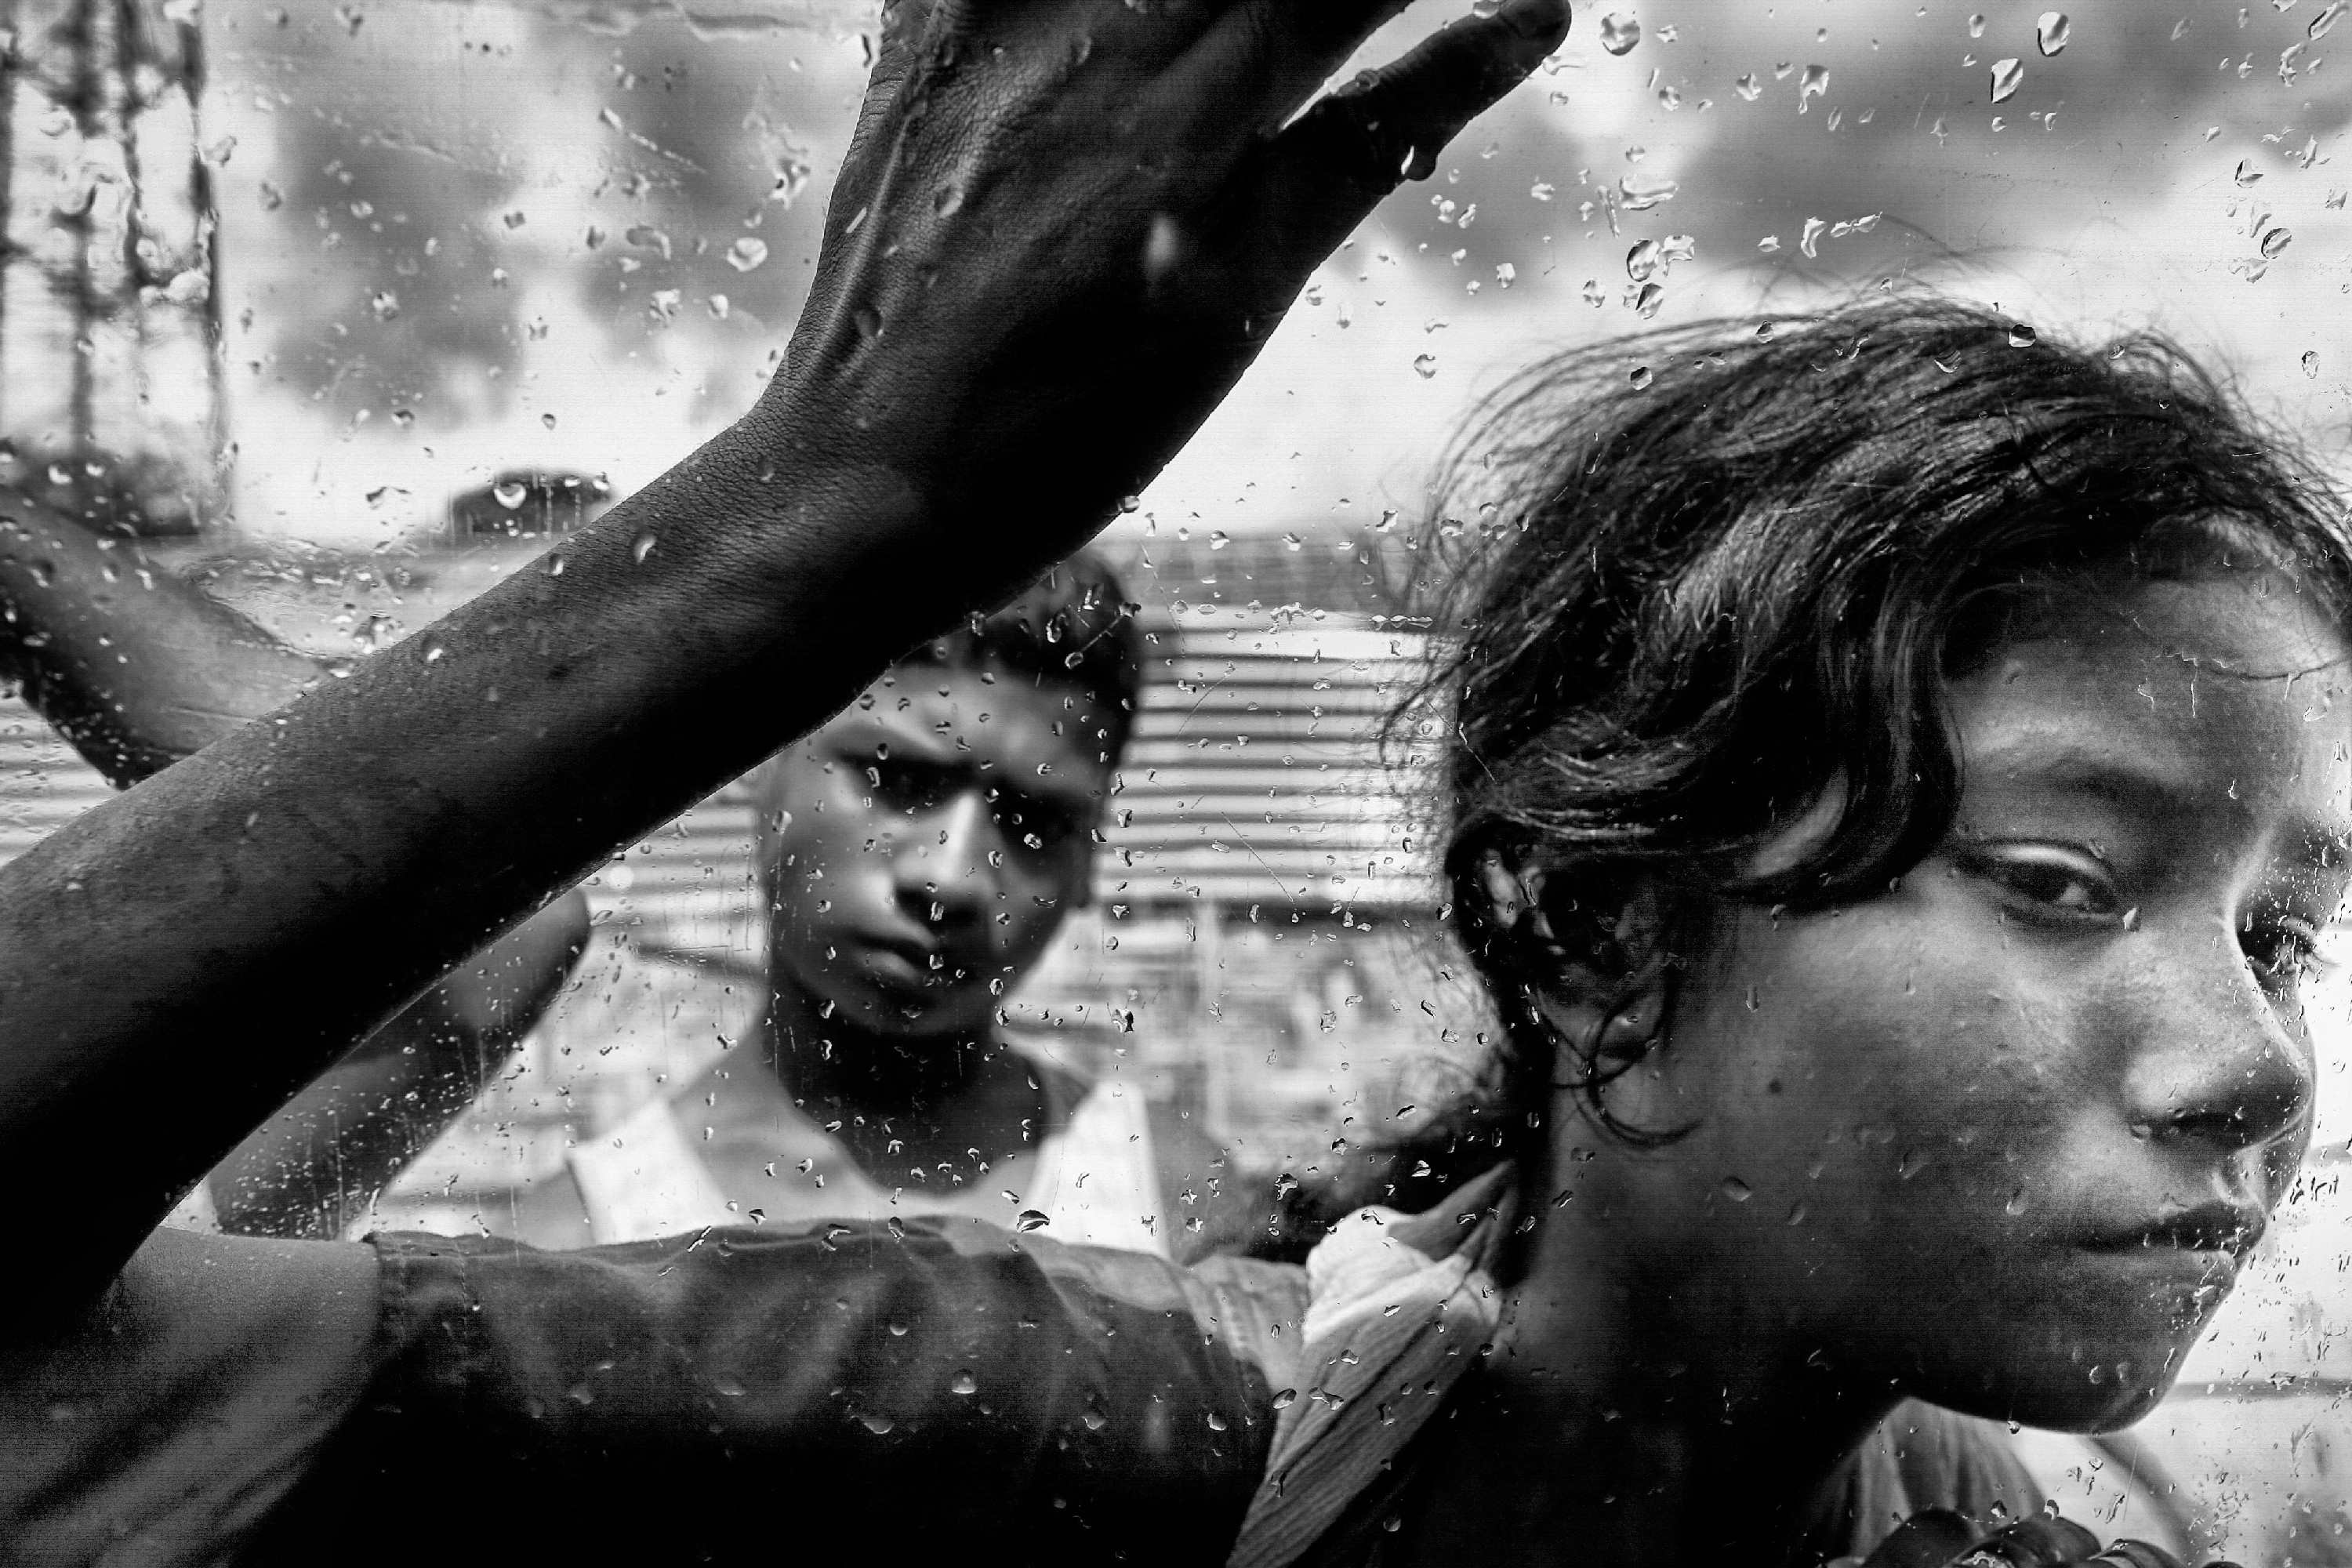 About four hundred thousand Rohingya refugees entered in Bangladesh by land and water border. Many refugees are trying to source food, water, and money to support themselves and standing beside the roads.